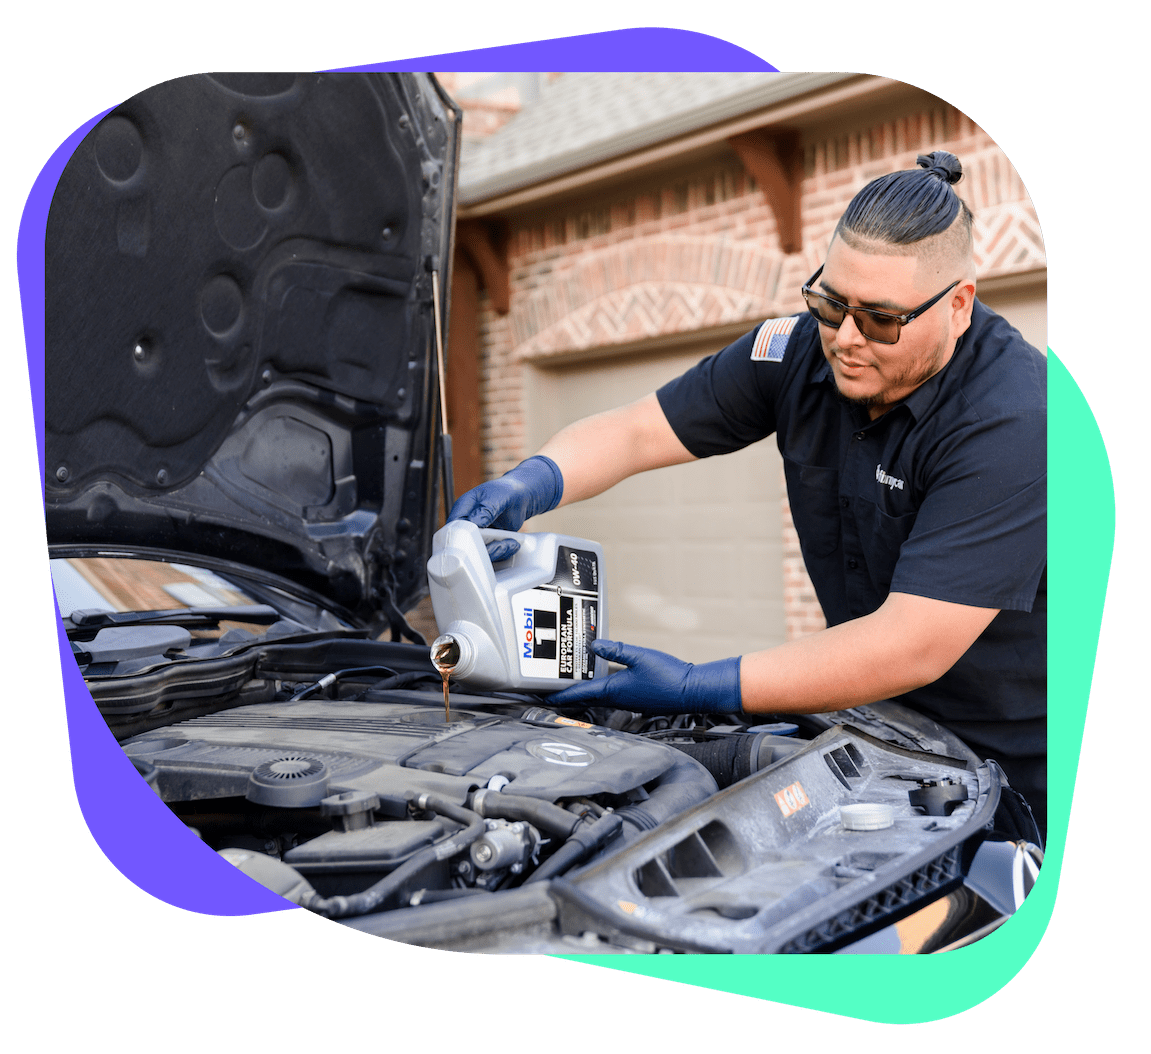 Synthetic Oil vs. Conventional Oil, Which One to Use?